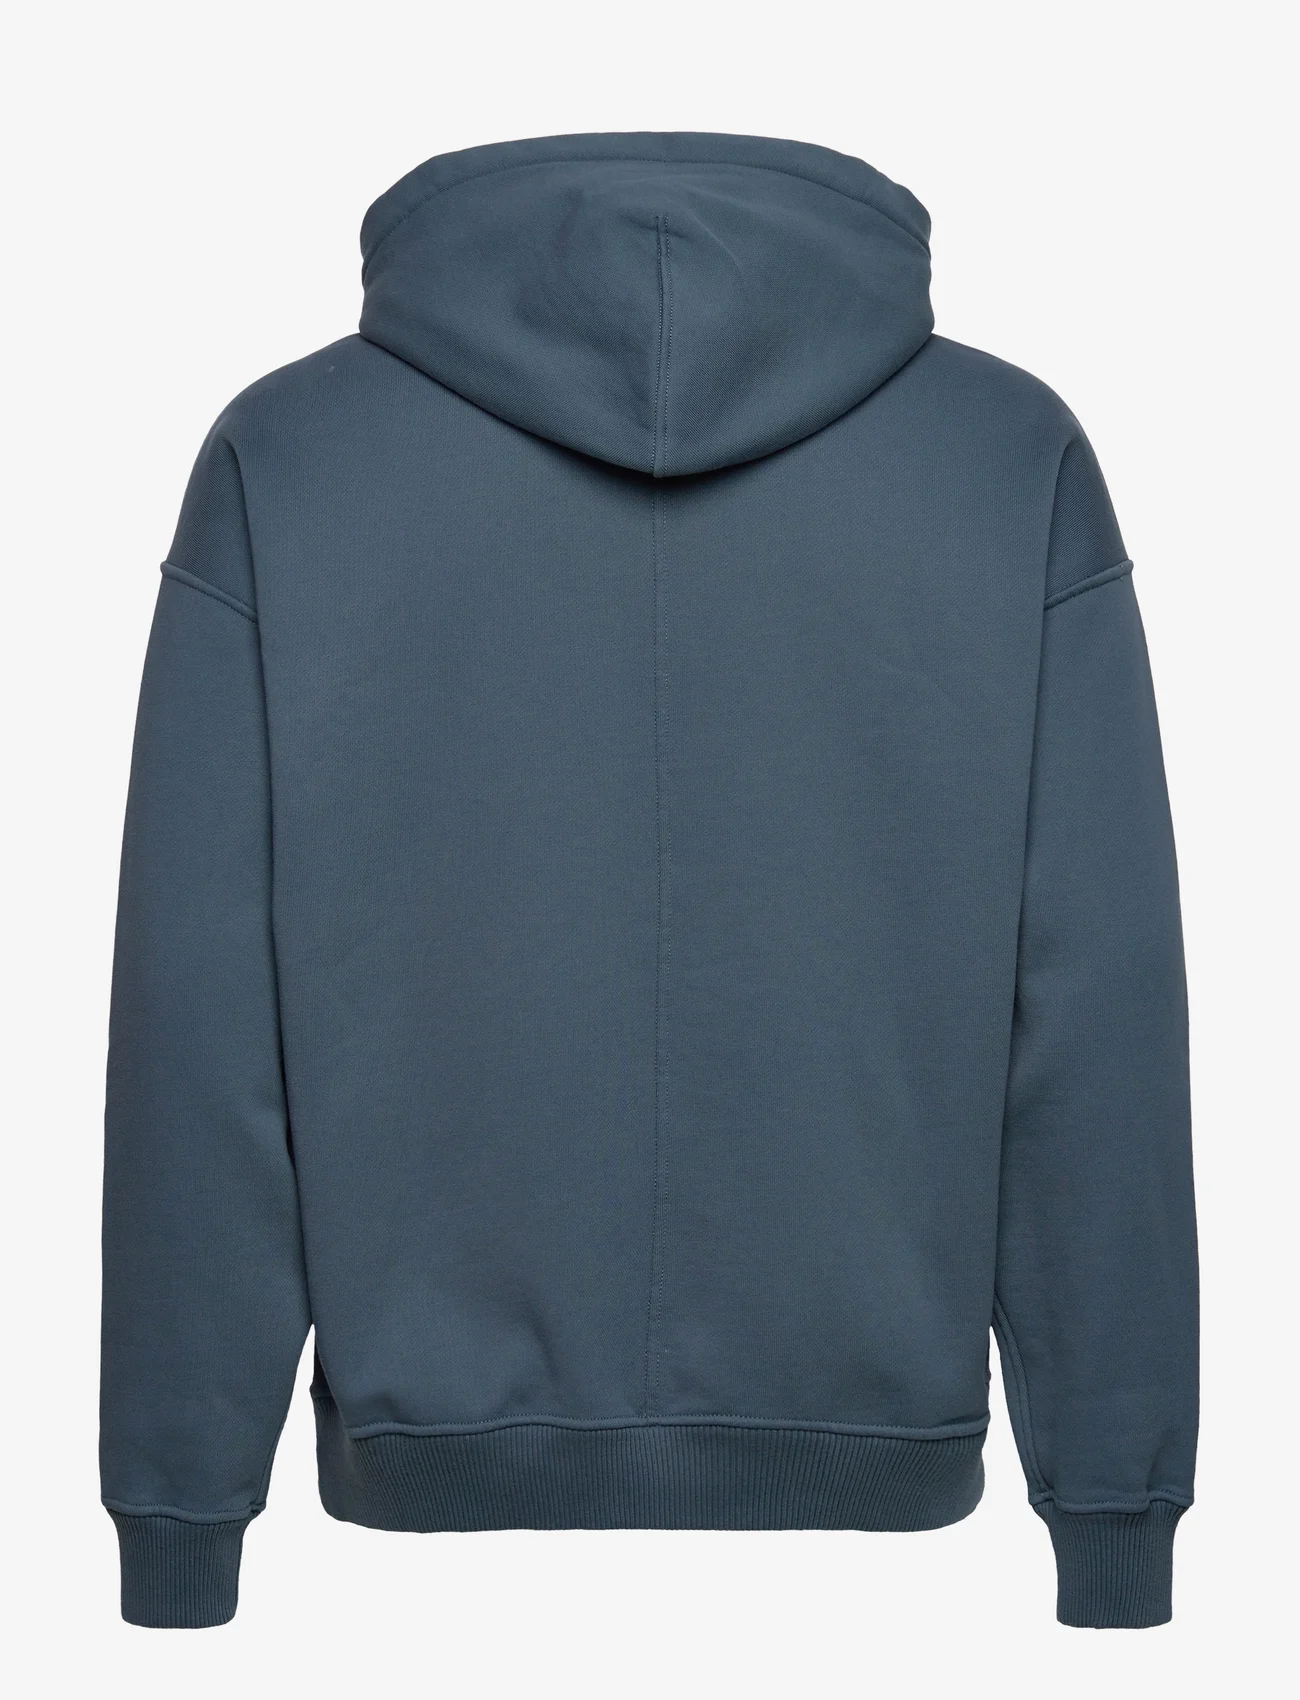 Abercrombie & Fitch - ANF MENS SWEATSHIRTS - kapuzenpullover - teal - 1